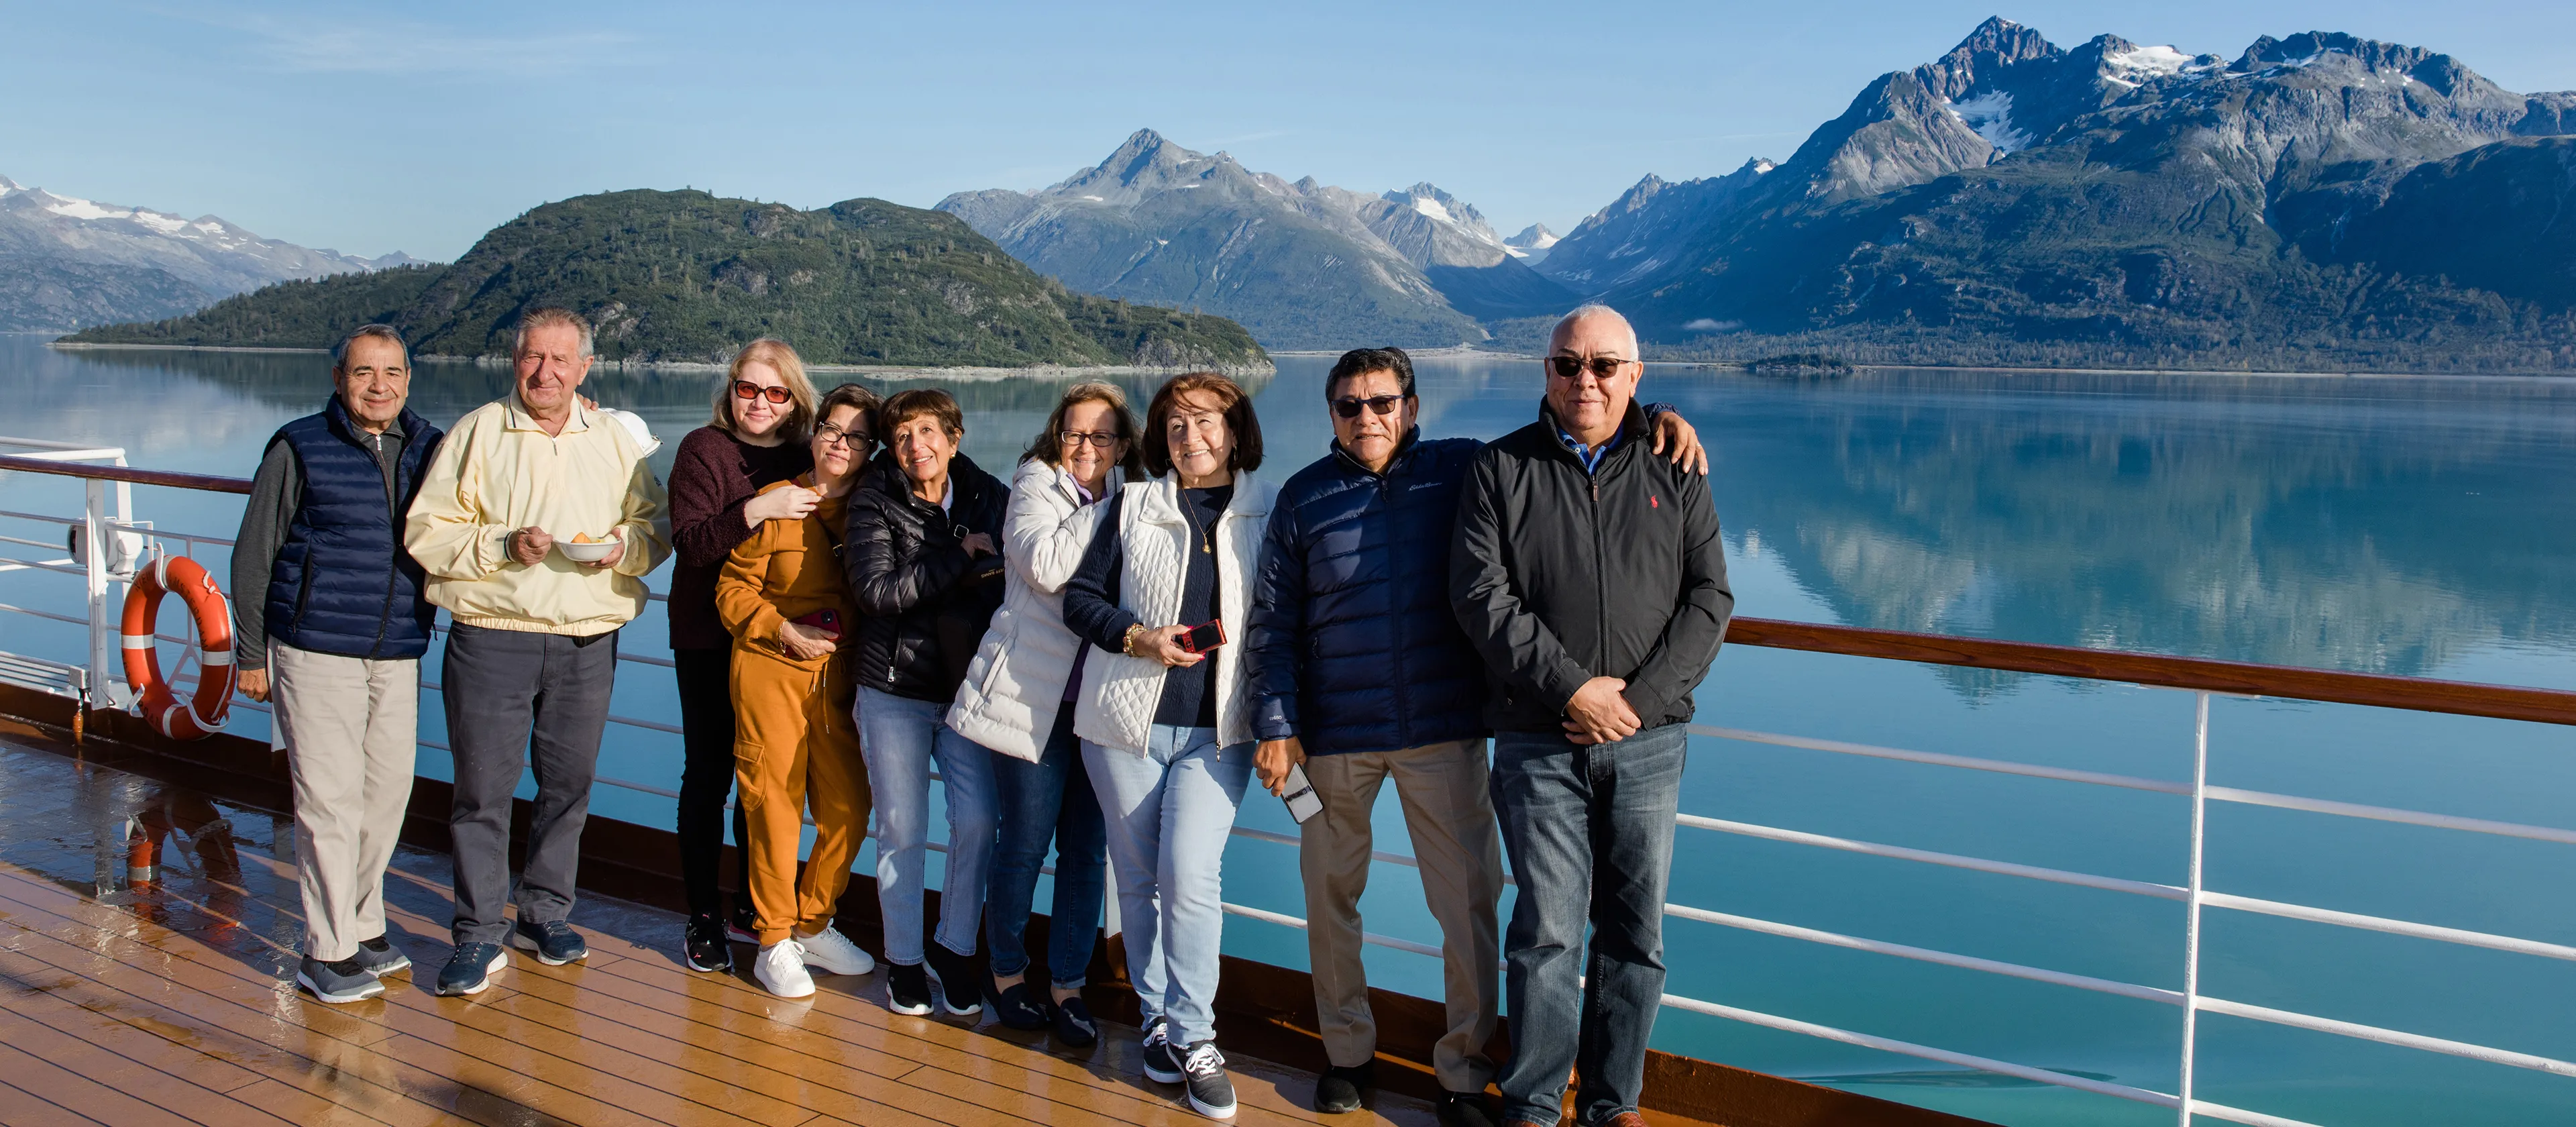 Group of travelers standing together on the deck of a cruise ship